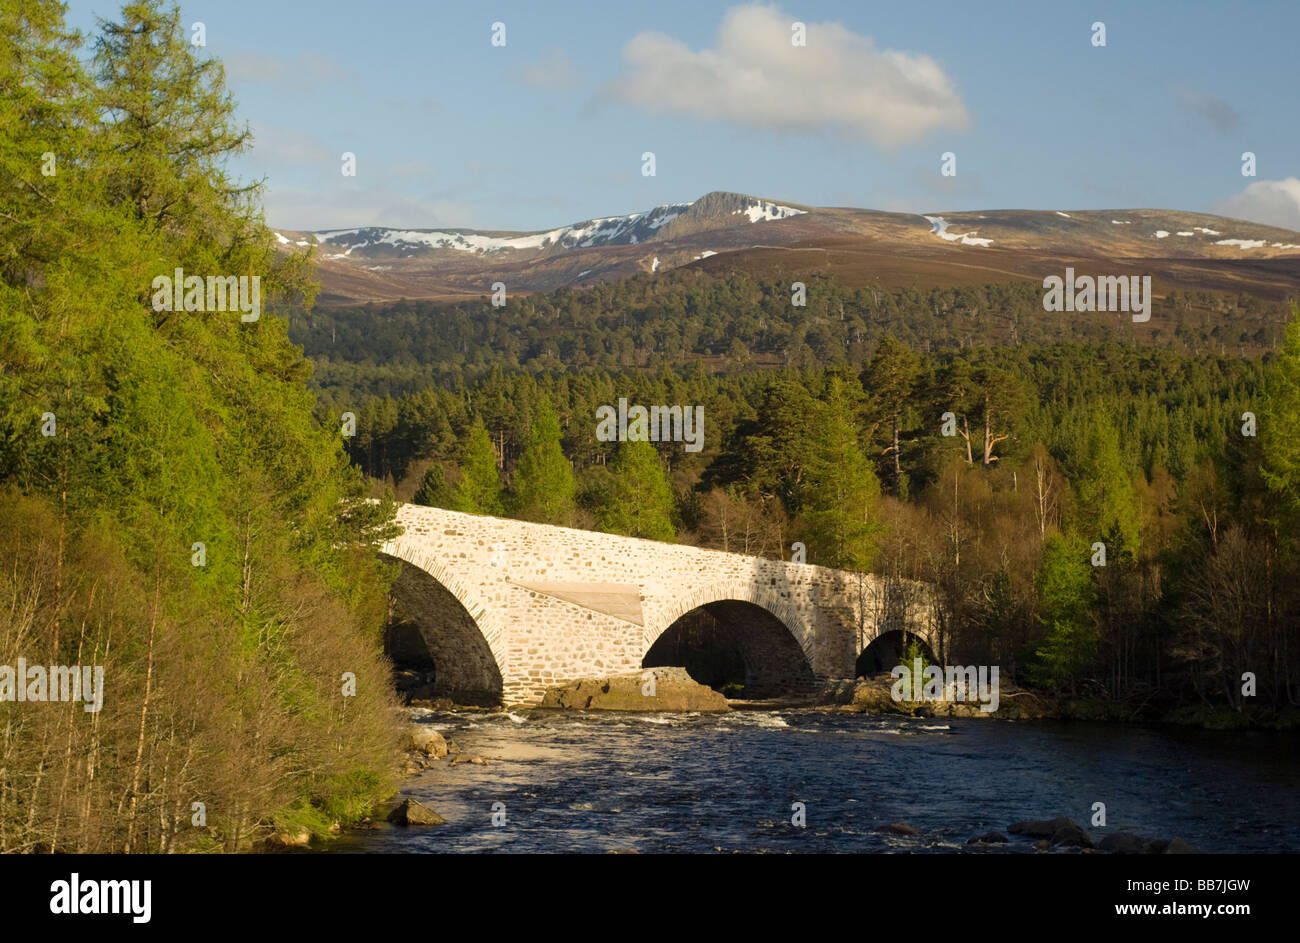 The Old Bridge of Dee at Invercauld, Braemar, looking across Ballochbuie Forest to the hills of the White Mounth. Stock Photo